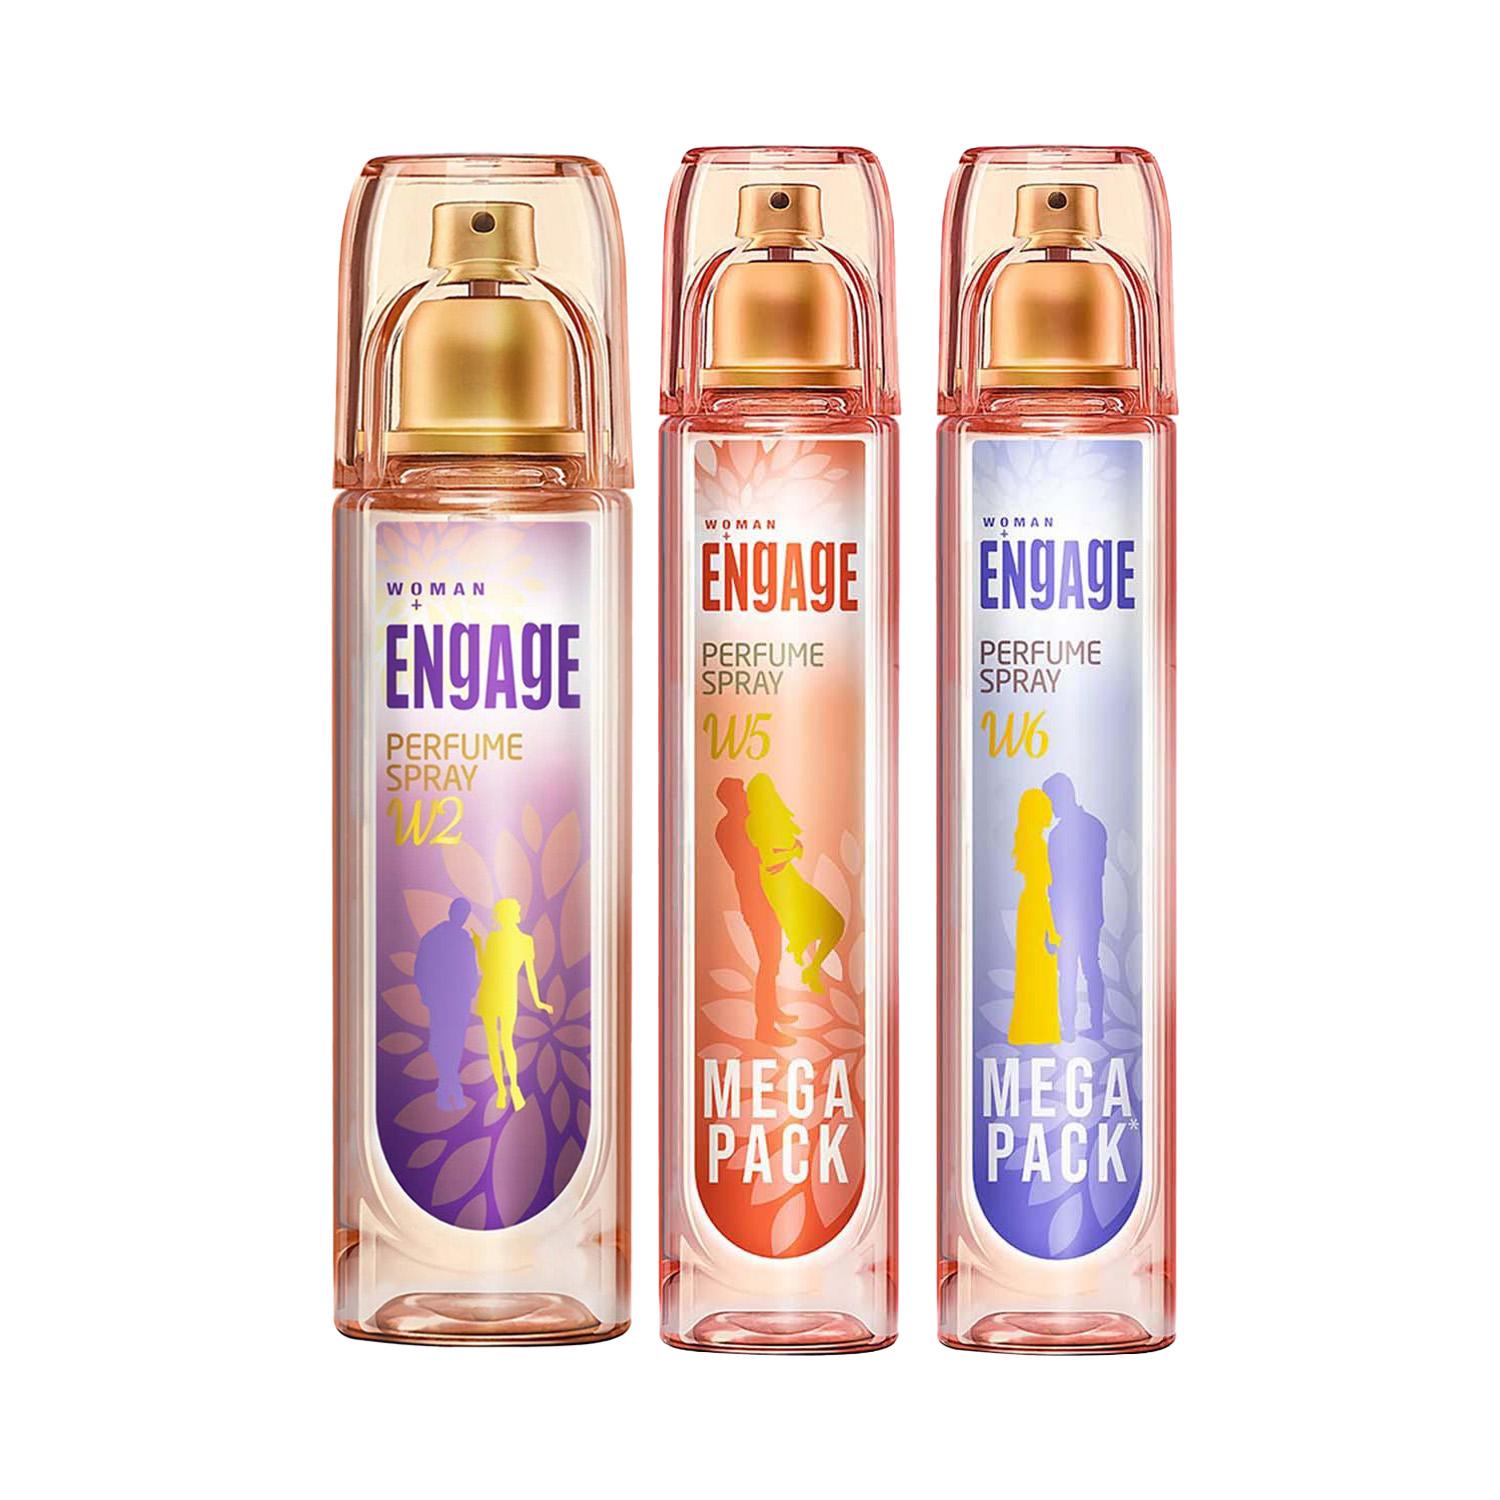 Engage | Engage W2, W5 & W6 Perfume Spray For Women Combo